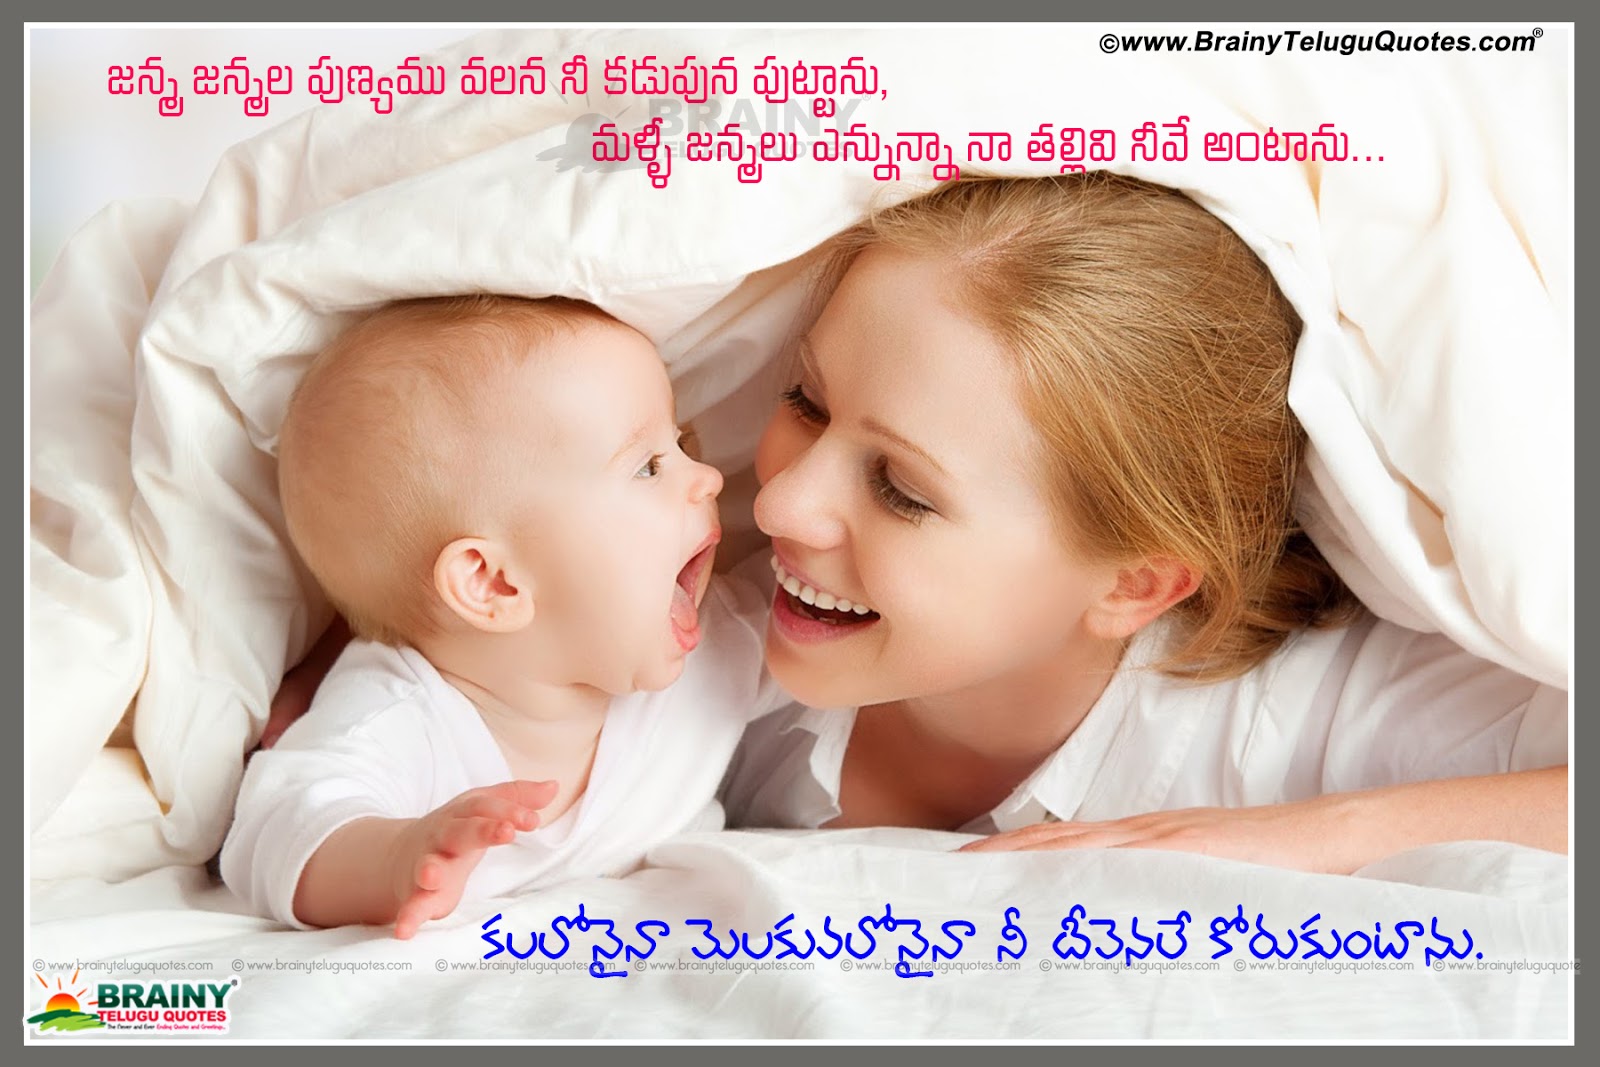 I Love You Messages Quotes For Mom With Mother And Child Hd Wallpapers Brainyteluguquotes Comtelugu Quotes English Quotes Hindi Quotes Tamil Quotes Greetings